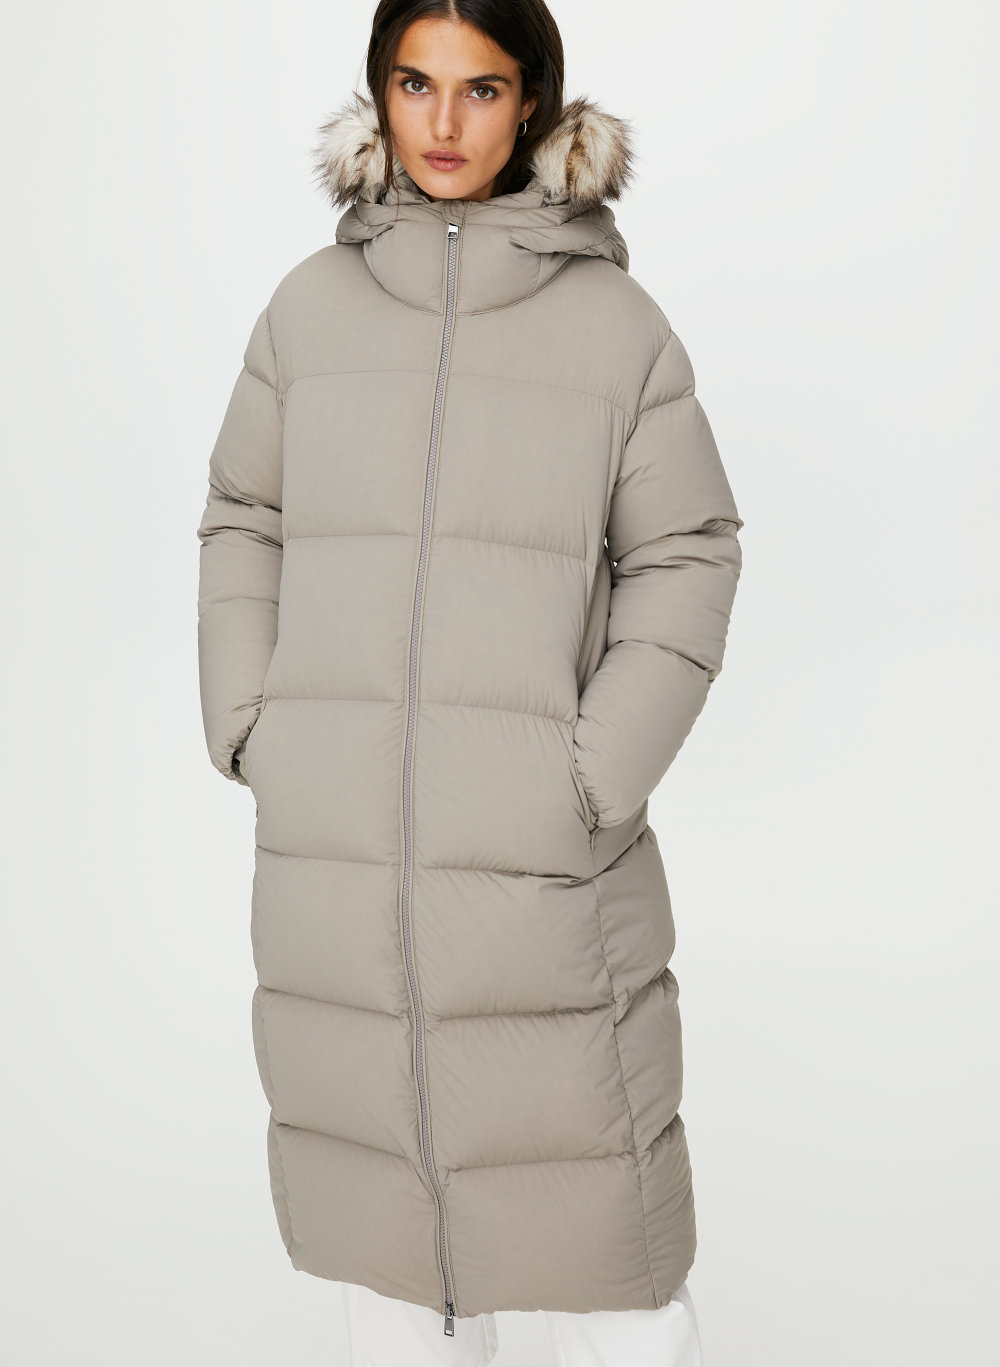 The Group by Babaton PARK CITY LONG PUFFER | Aritzia US